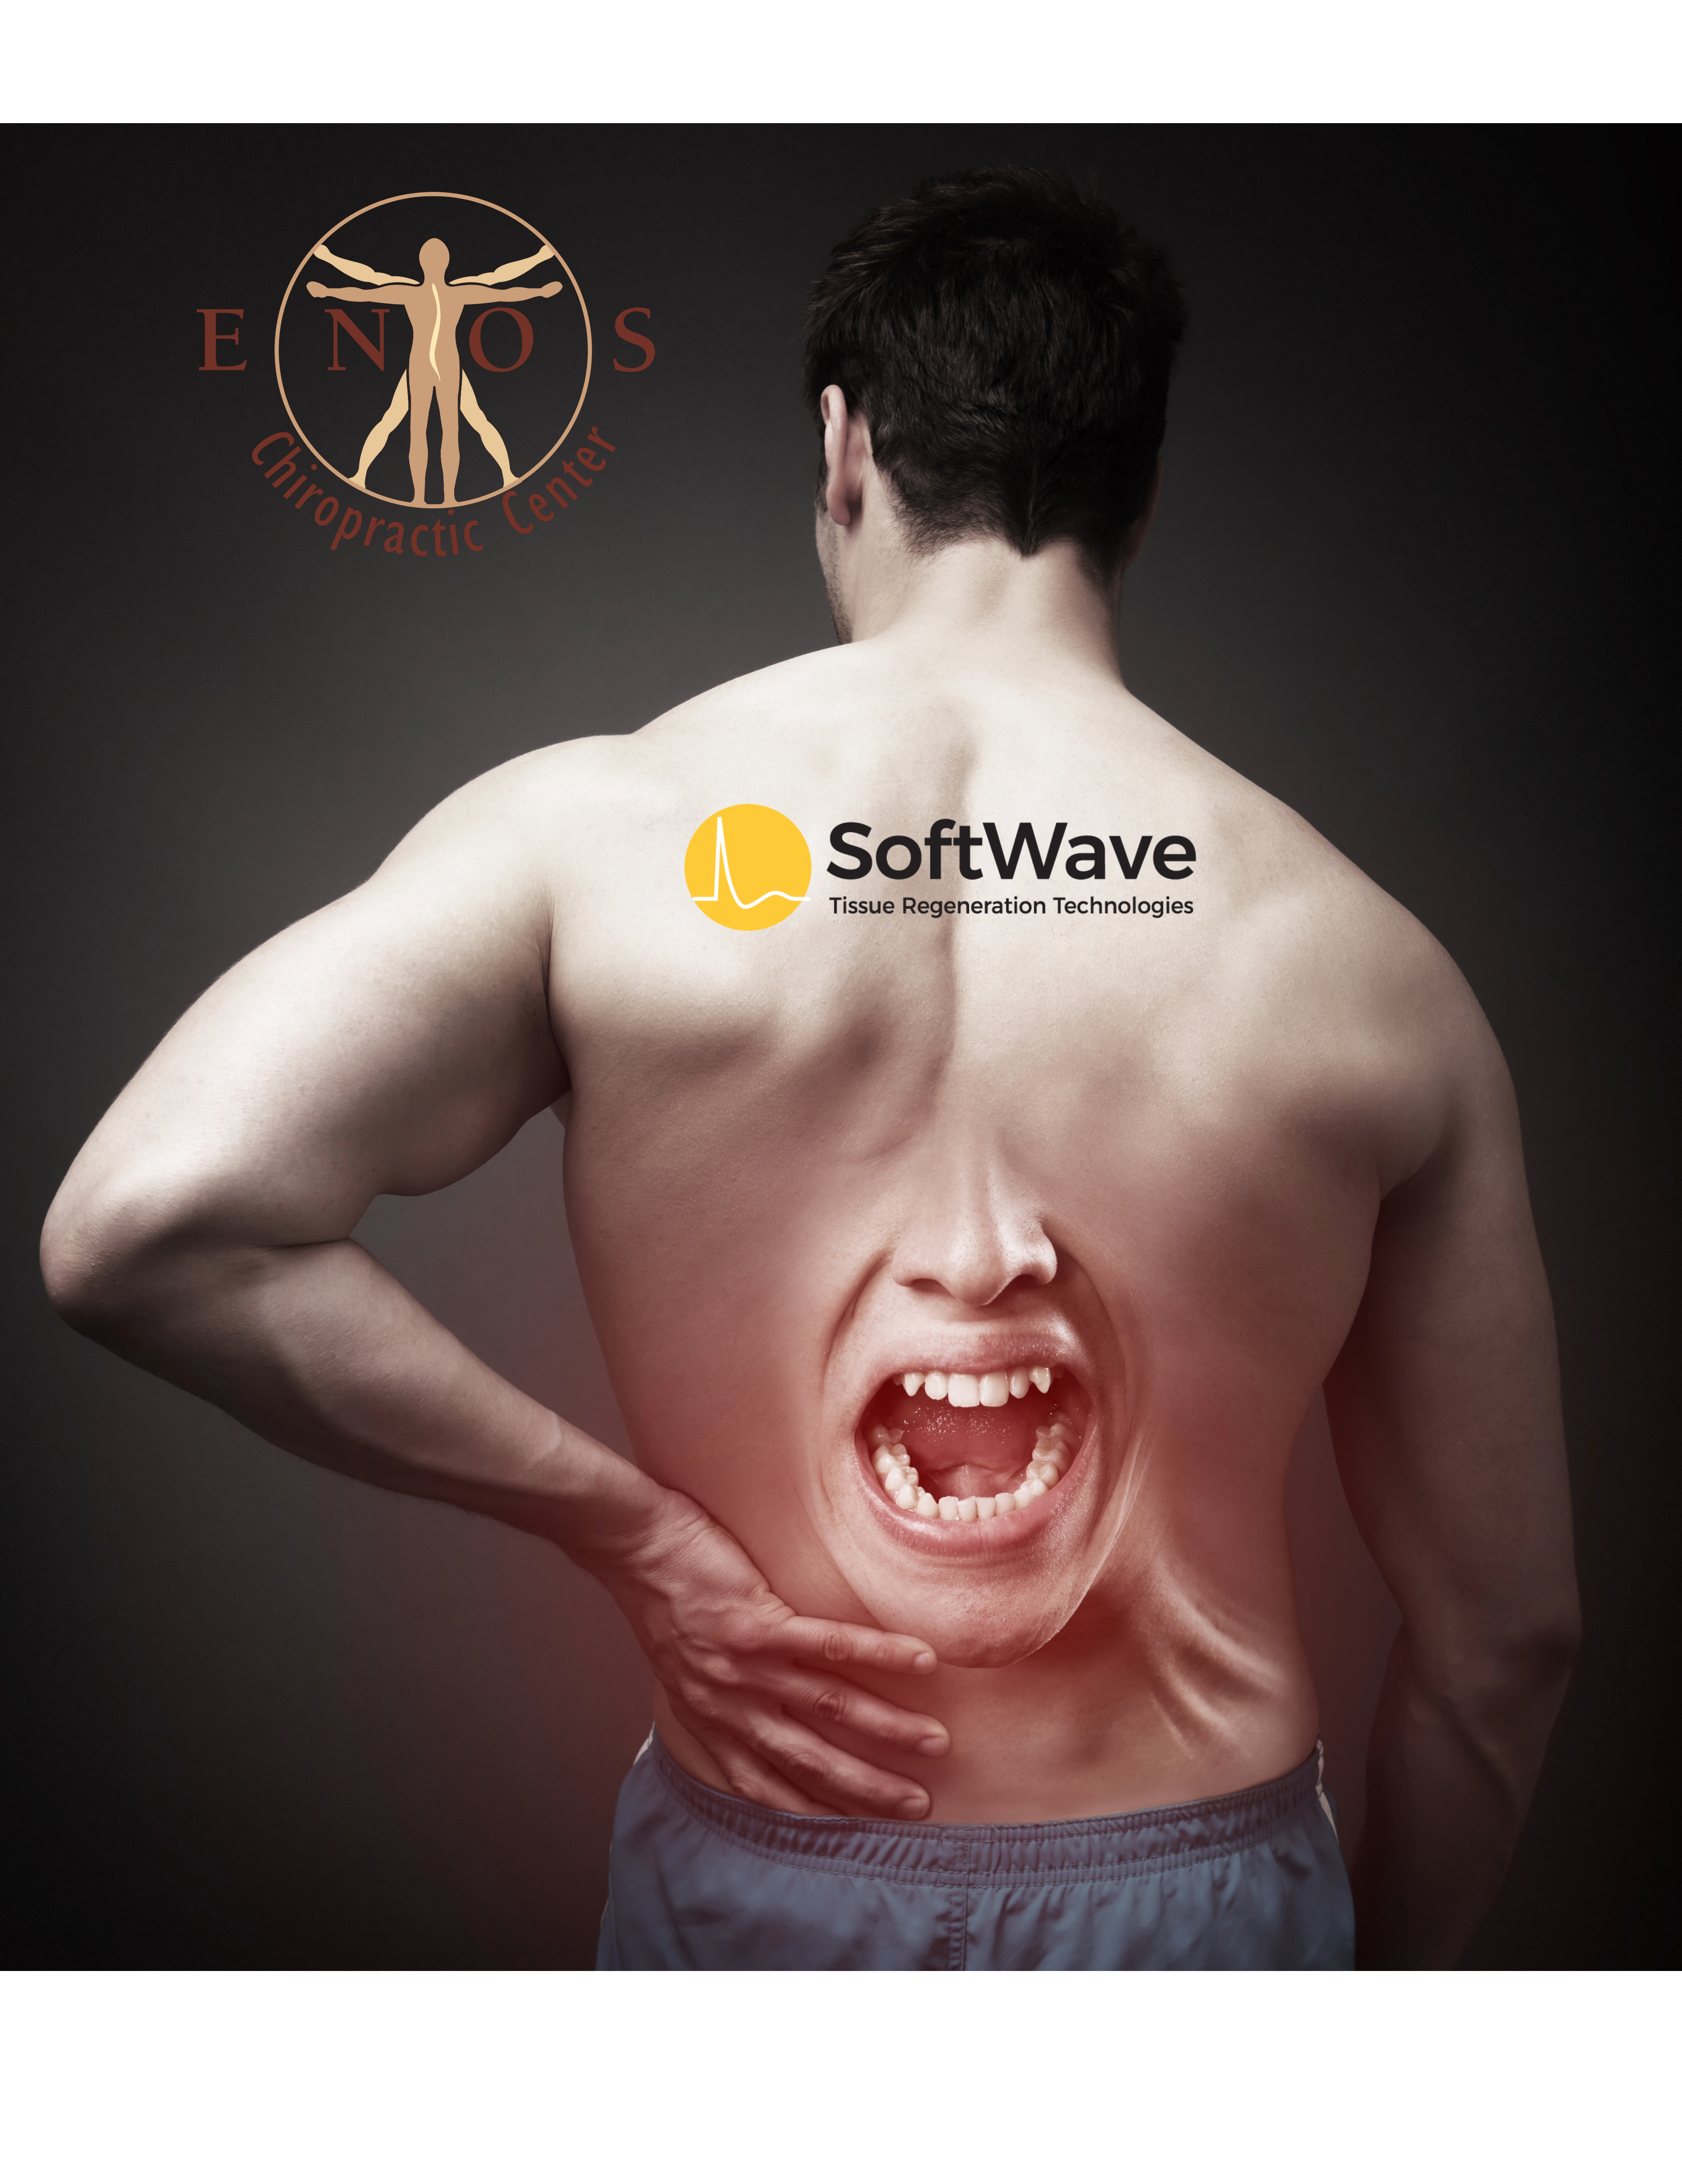 Revolutionizing Chronic Lower Back Pain Treatment: SoftWave TRT Therapy at Enos Chiropractic Center